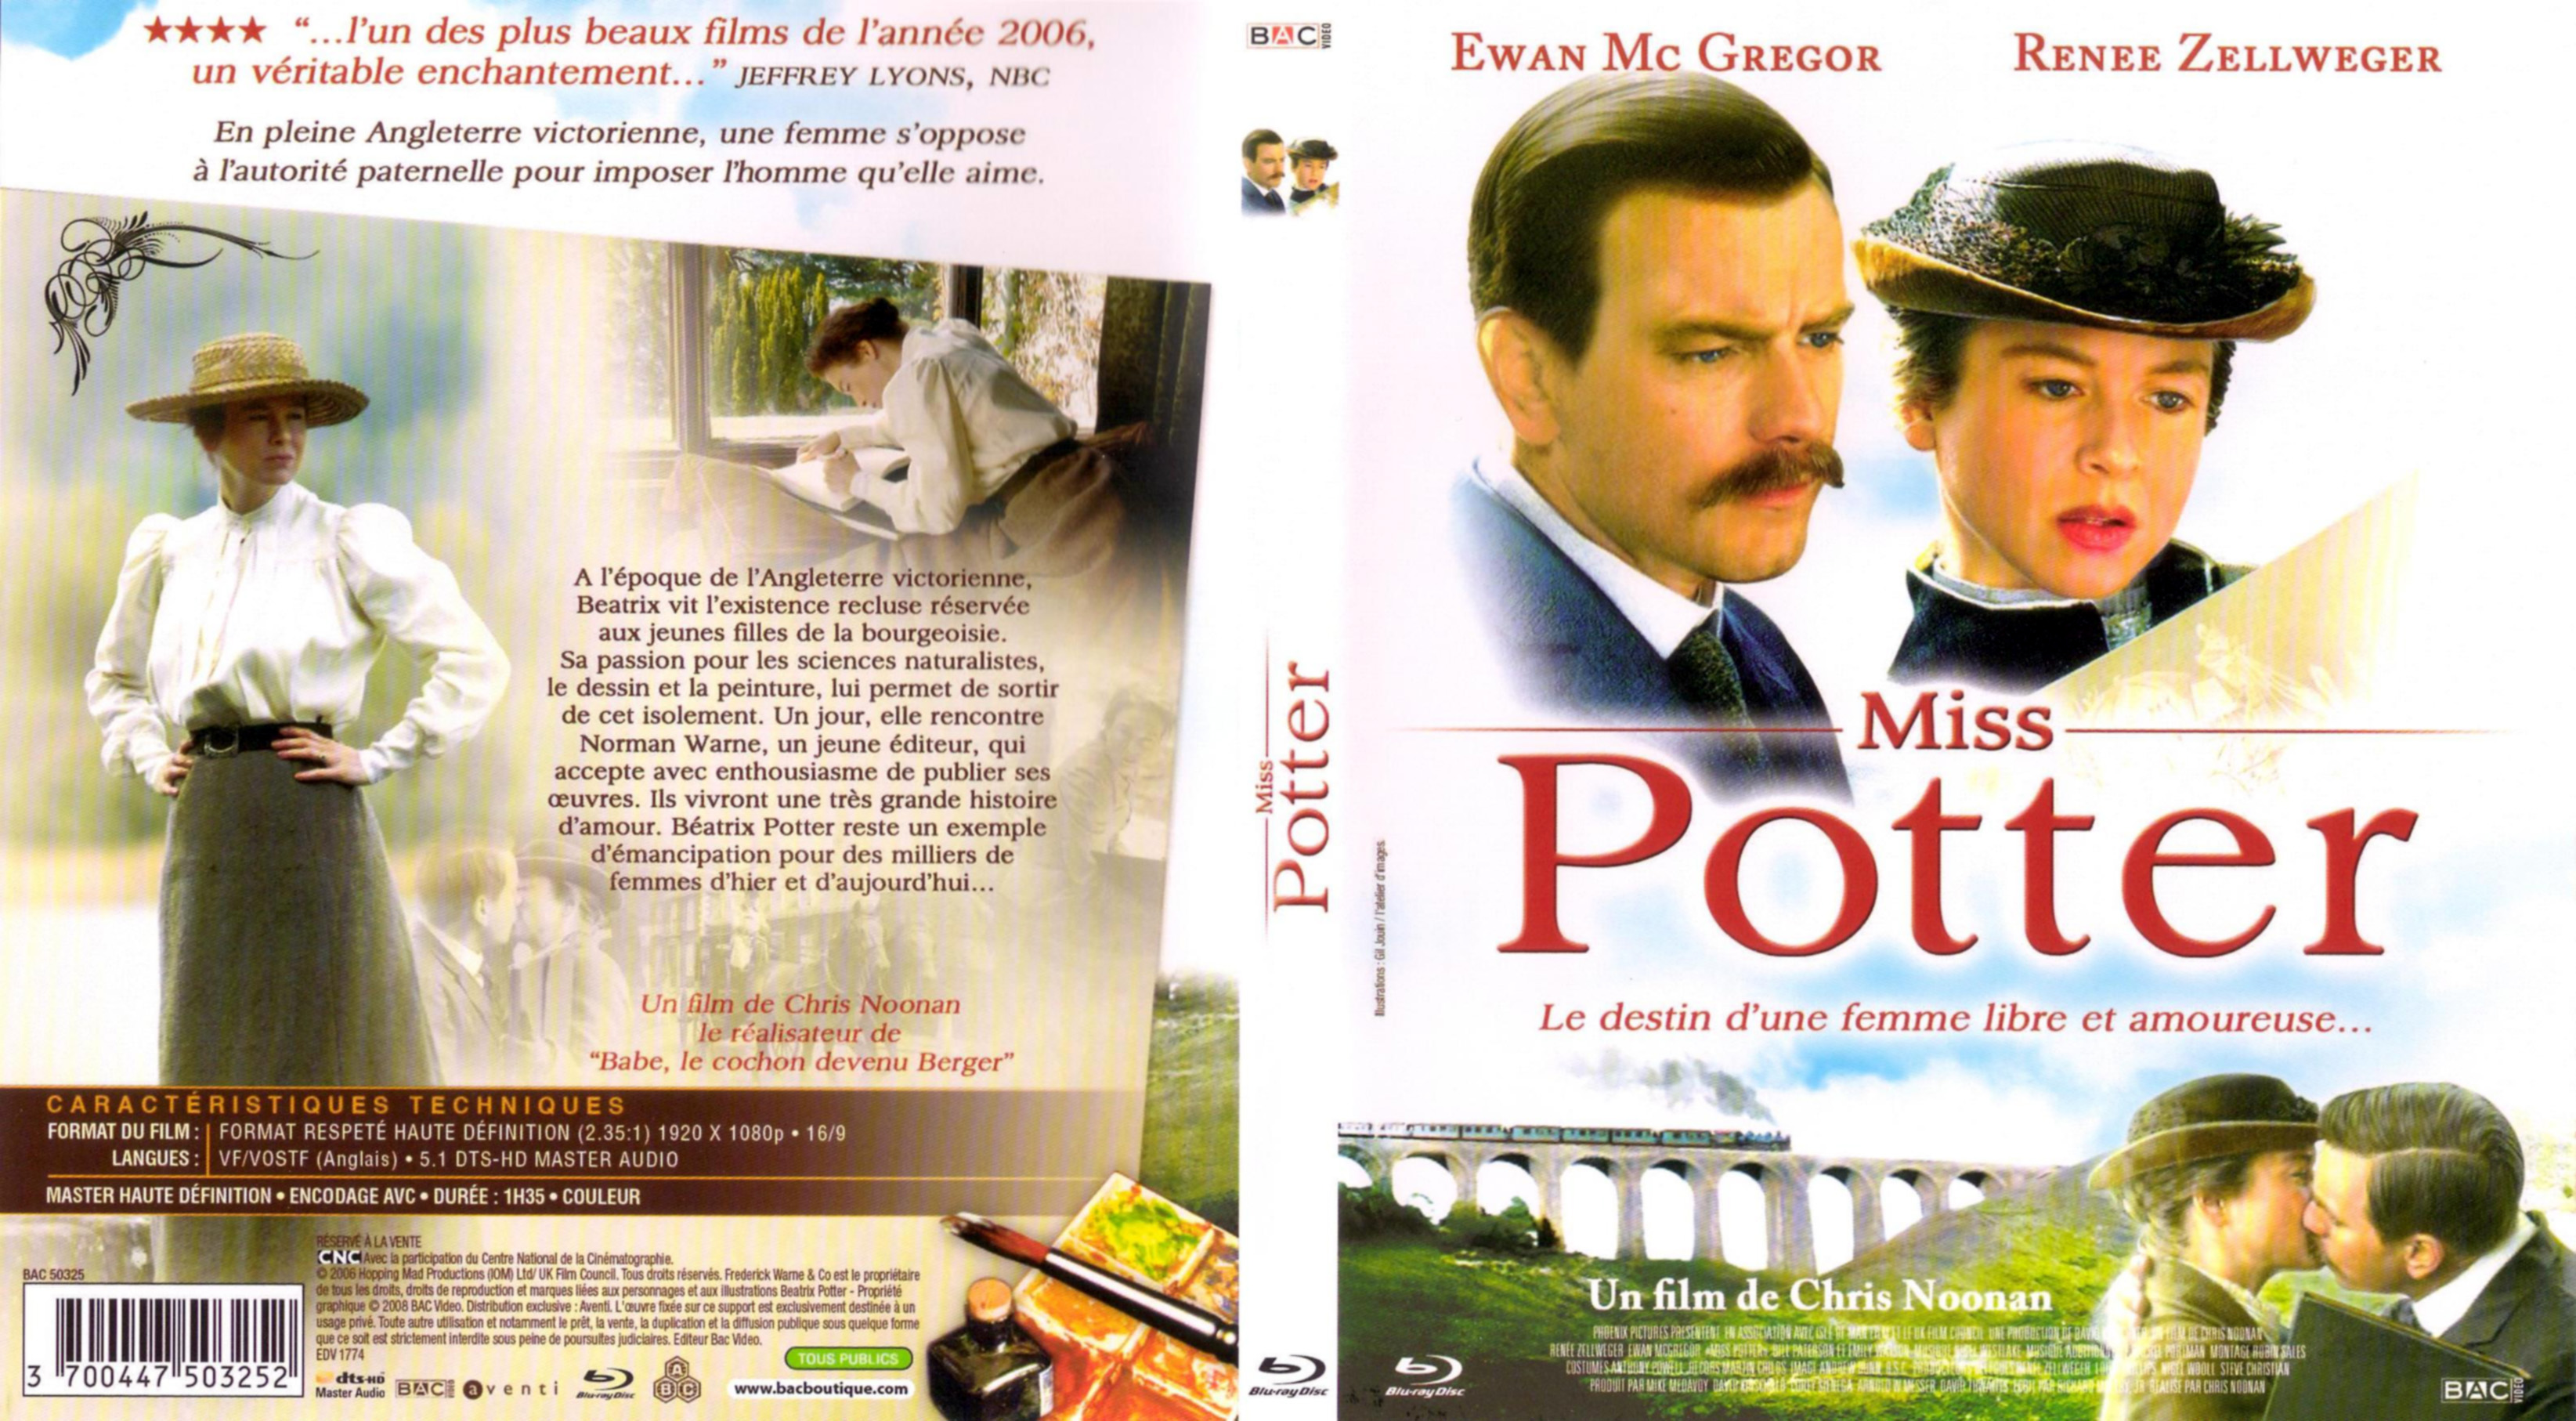 Jaquette DVD Miss Potter (BLU-RAY)